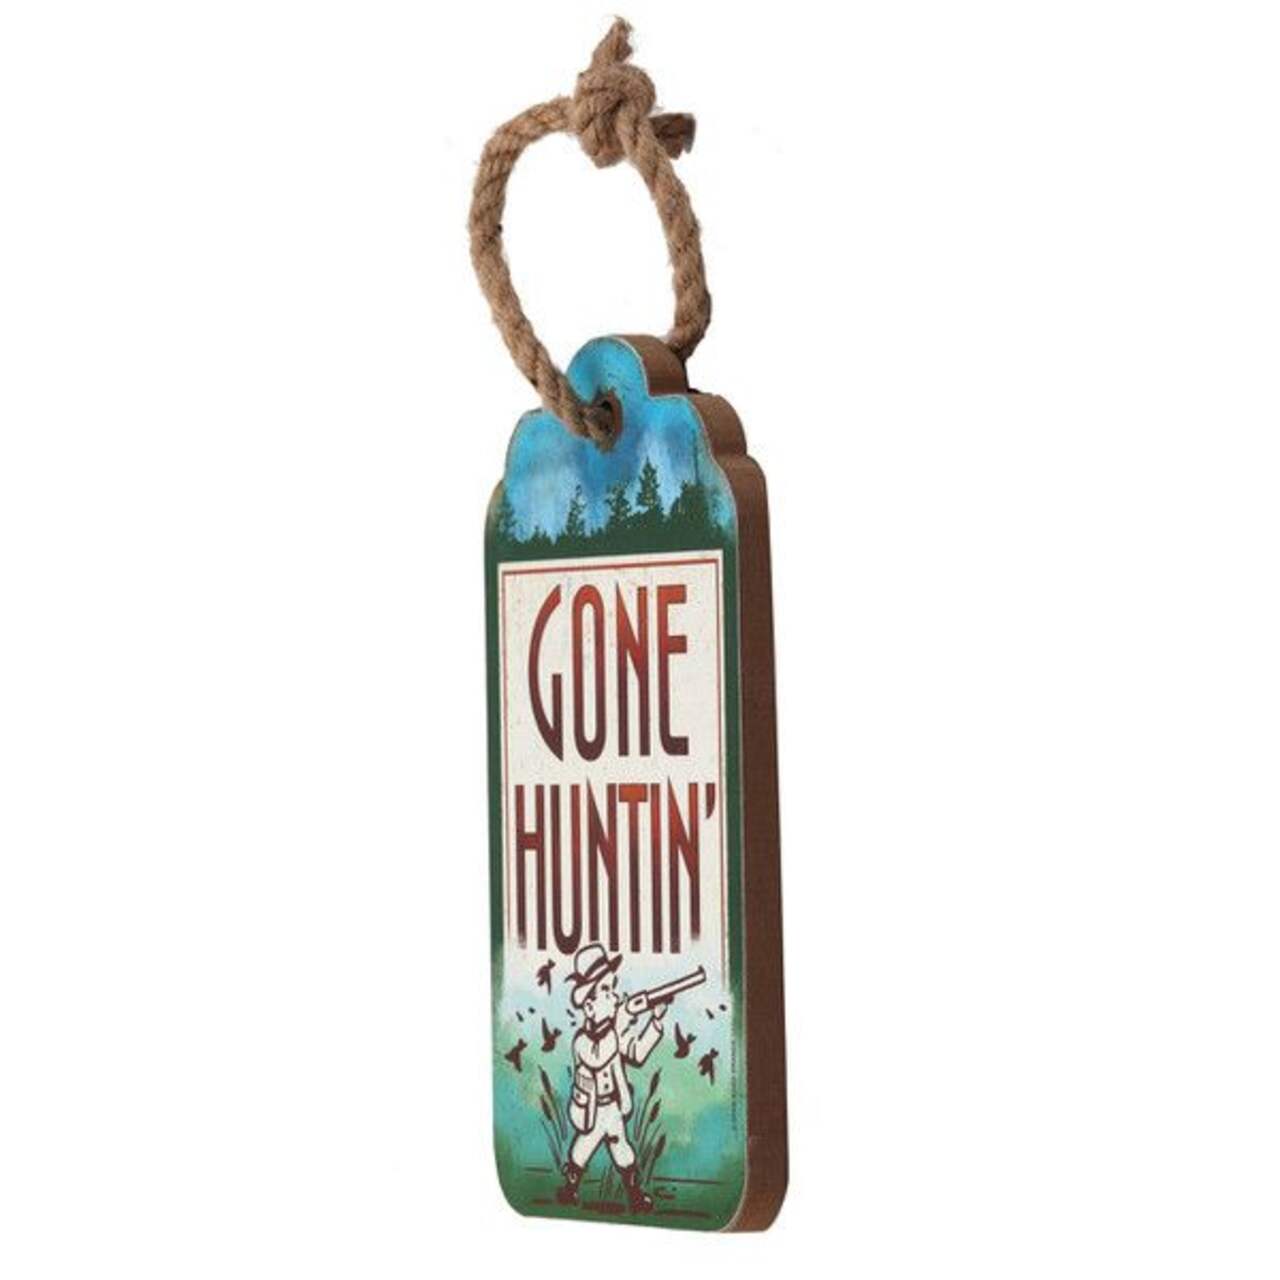 https://media-www.canadiantire.ca/product/playing/hunting/hunting-accessories/3751668/gone-hunting-hanging-wood-6fc8b816-5aeb-4d4a-a463-620b9e576c0d-jpgrendition.jpg?imdensity=1&imwidth=640&impolicy=mZoom